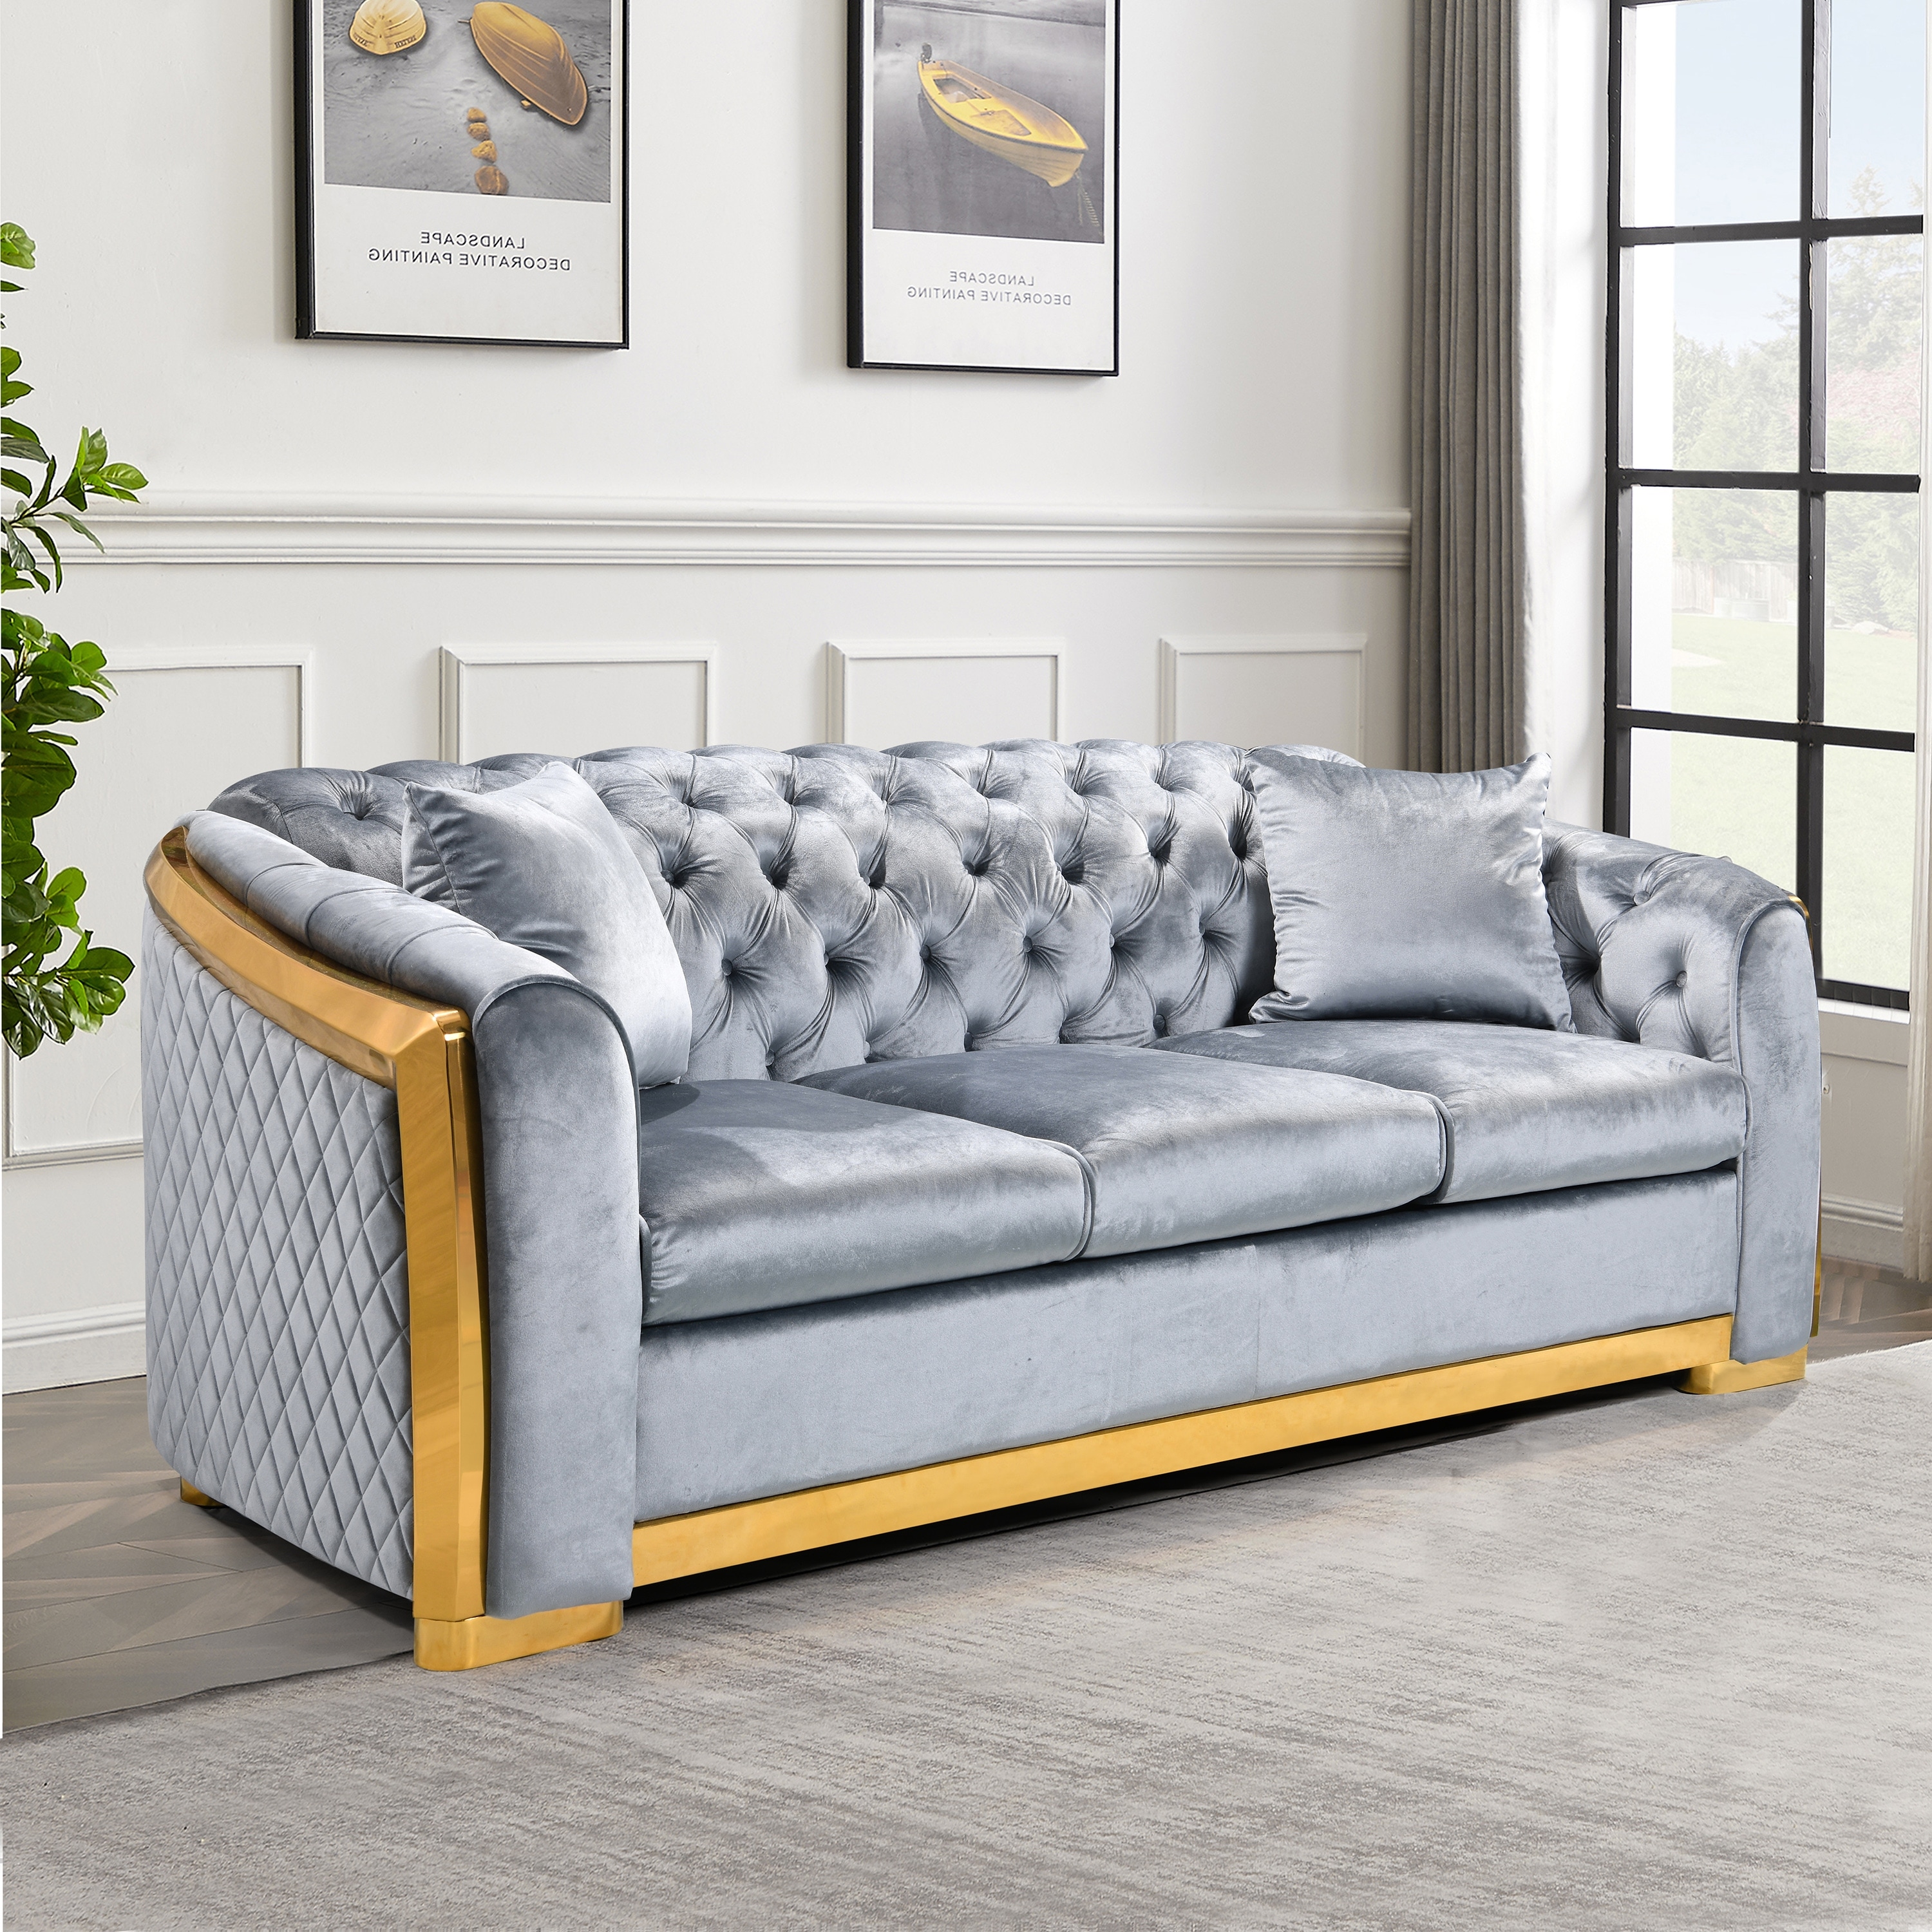 https://ak1.ostkcdn.com/images/products/is/images/direct/5f6cc3bdc5a02b81229db80a112b8c6fd3d2f9d2/5-Seat-Velvet-Chesterfield-Sofa-Modern-84-Inches-Tufted-Couch-with-Stainless-Steel-Legs-%26-Arms-for-Living-Room.jpg